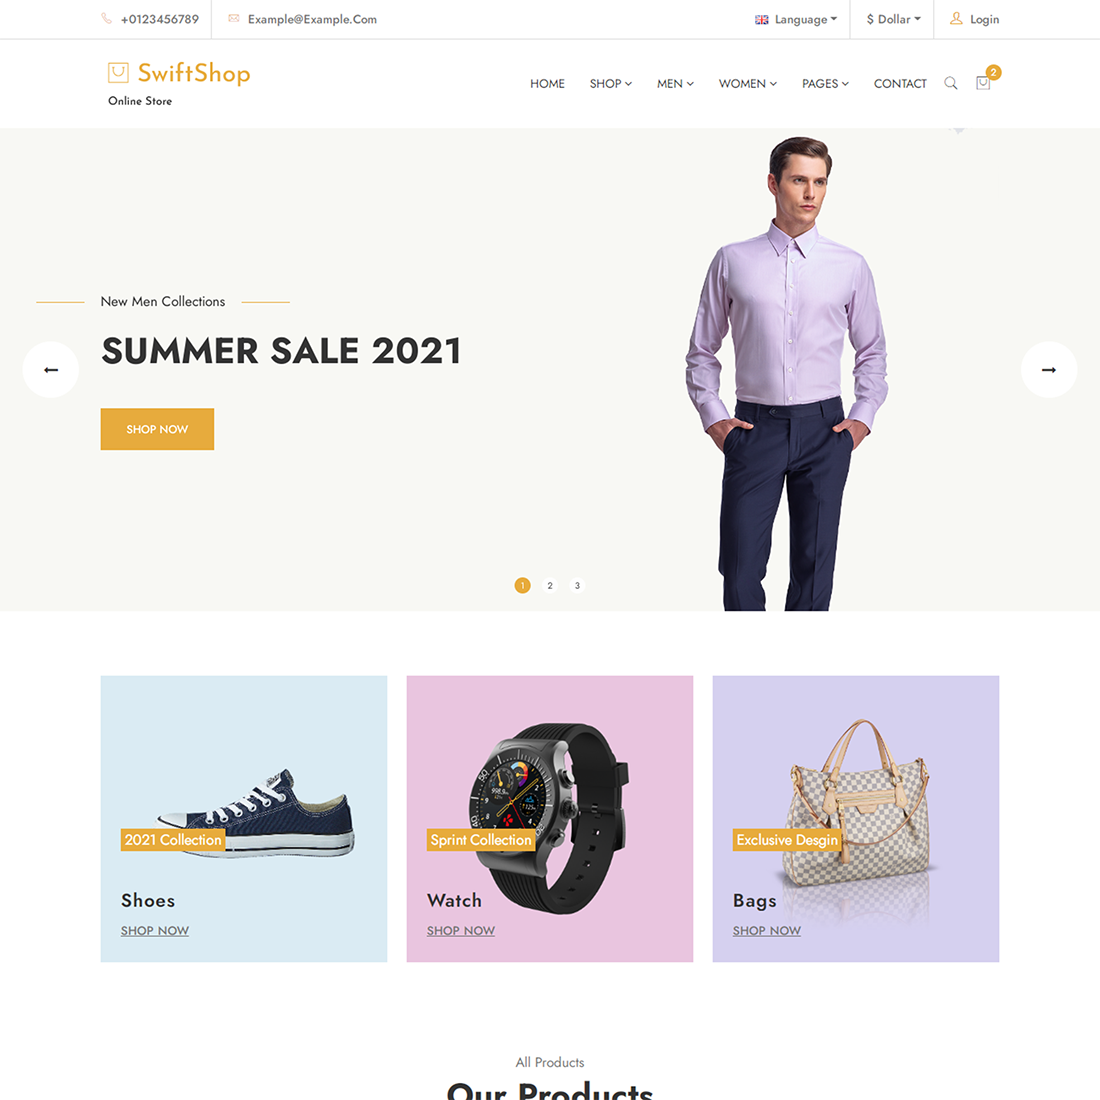 Ecommerce Website HTML Template cover image.